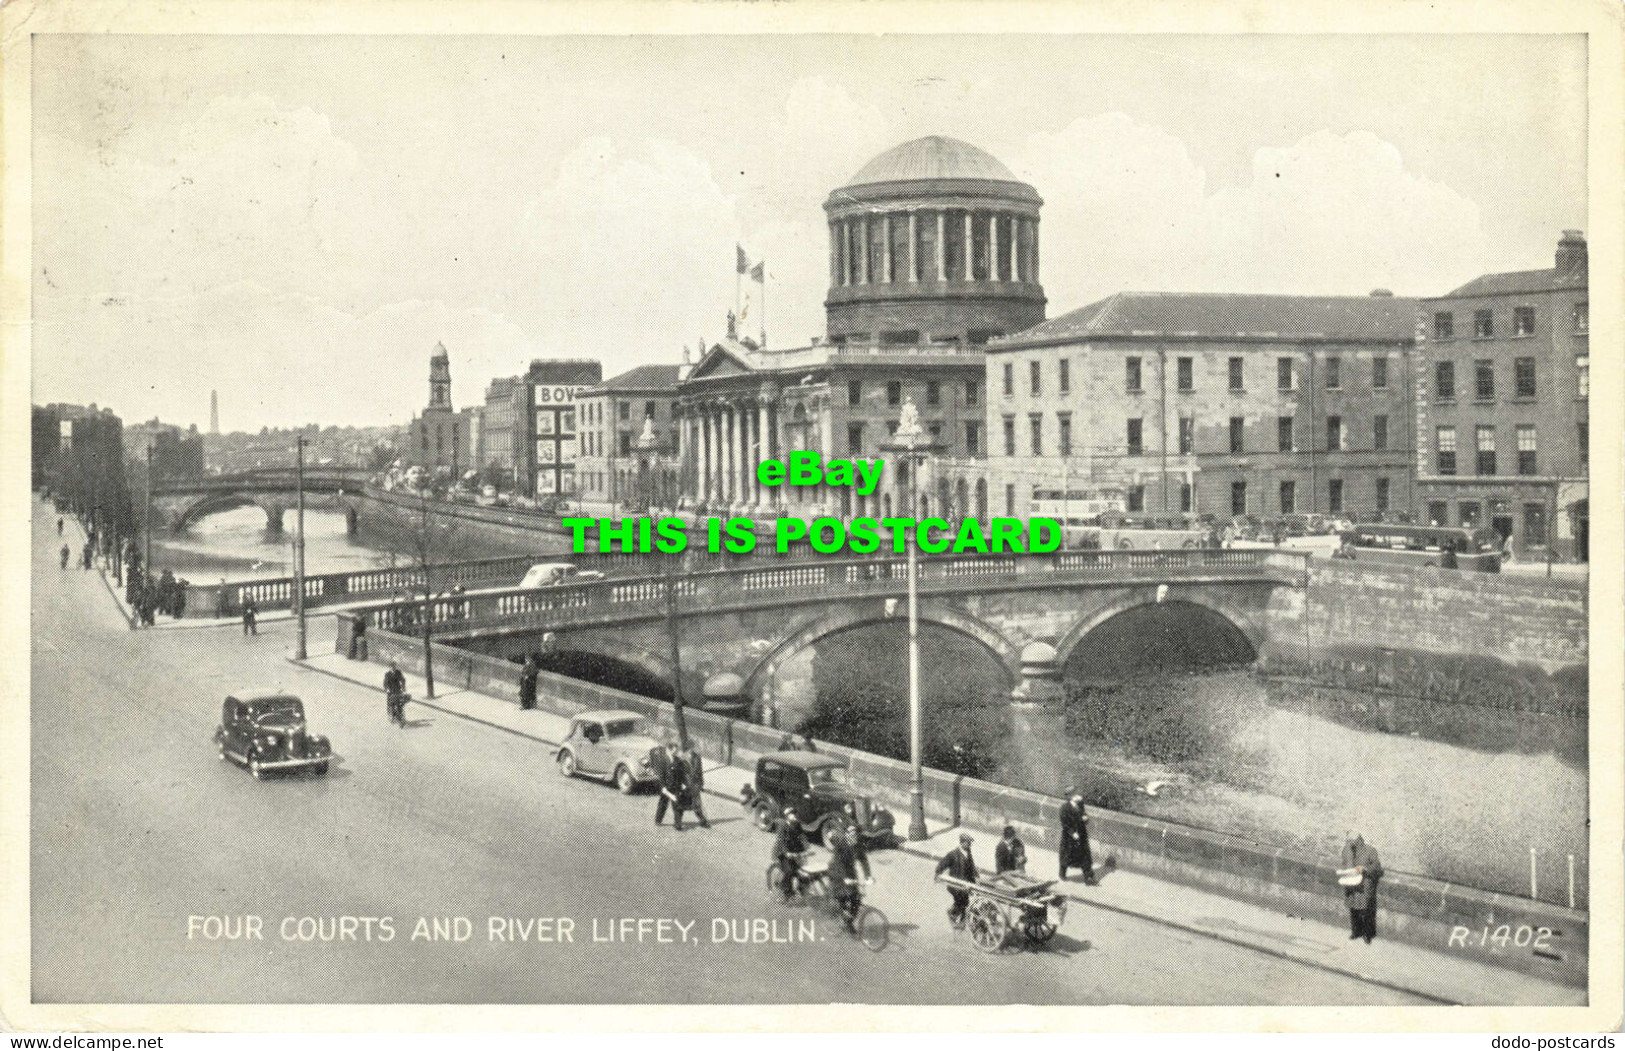 R568253 Four Courts And River Liffey. Dublin. R.1402. Valentines. 1956 - World